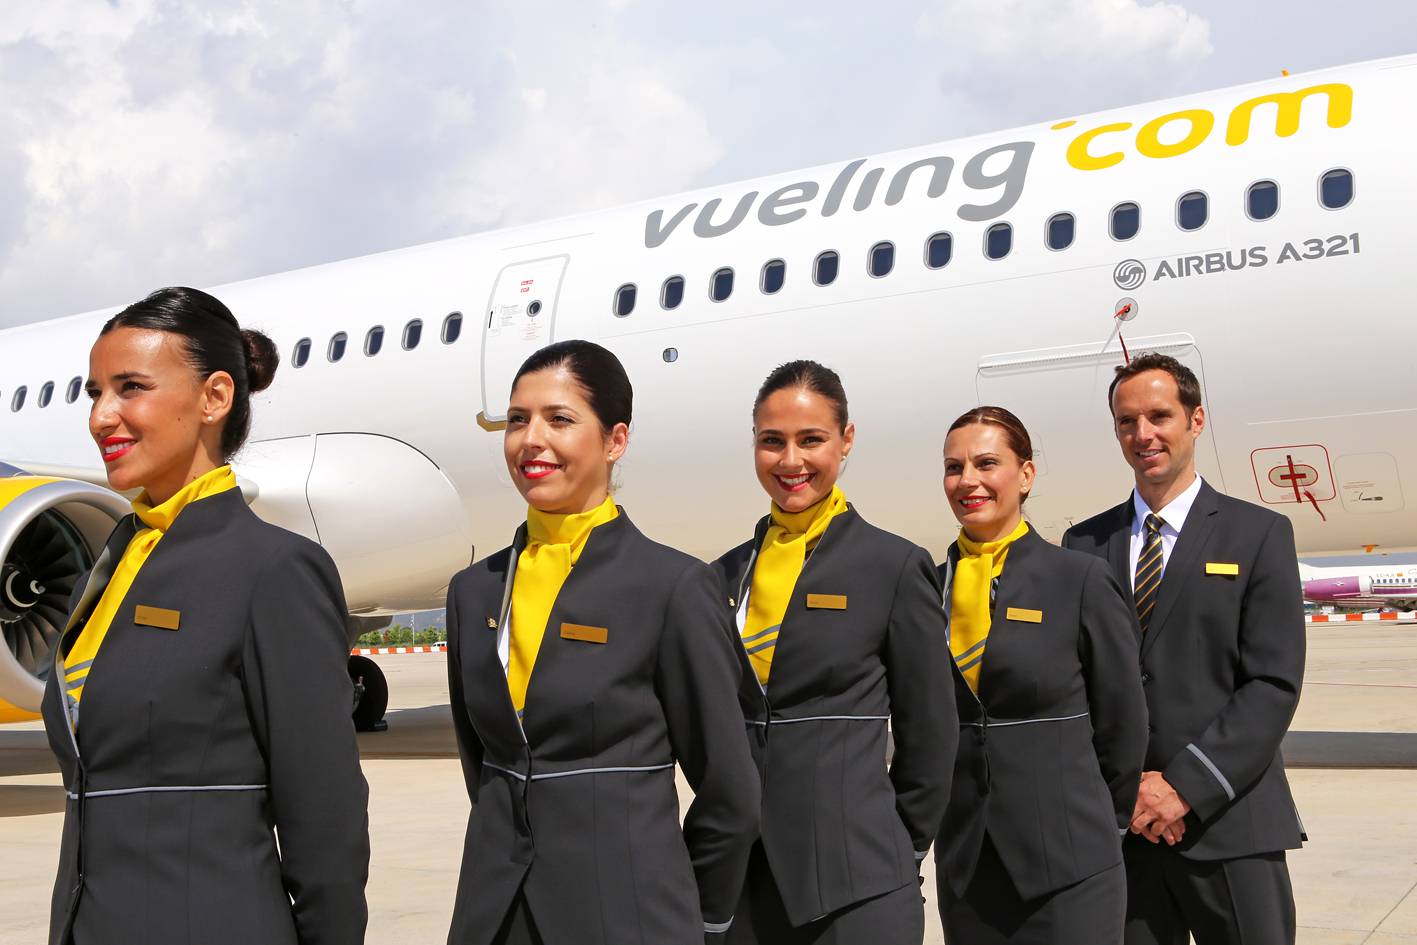 Vueling airlines